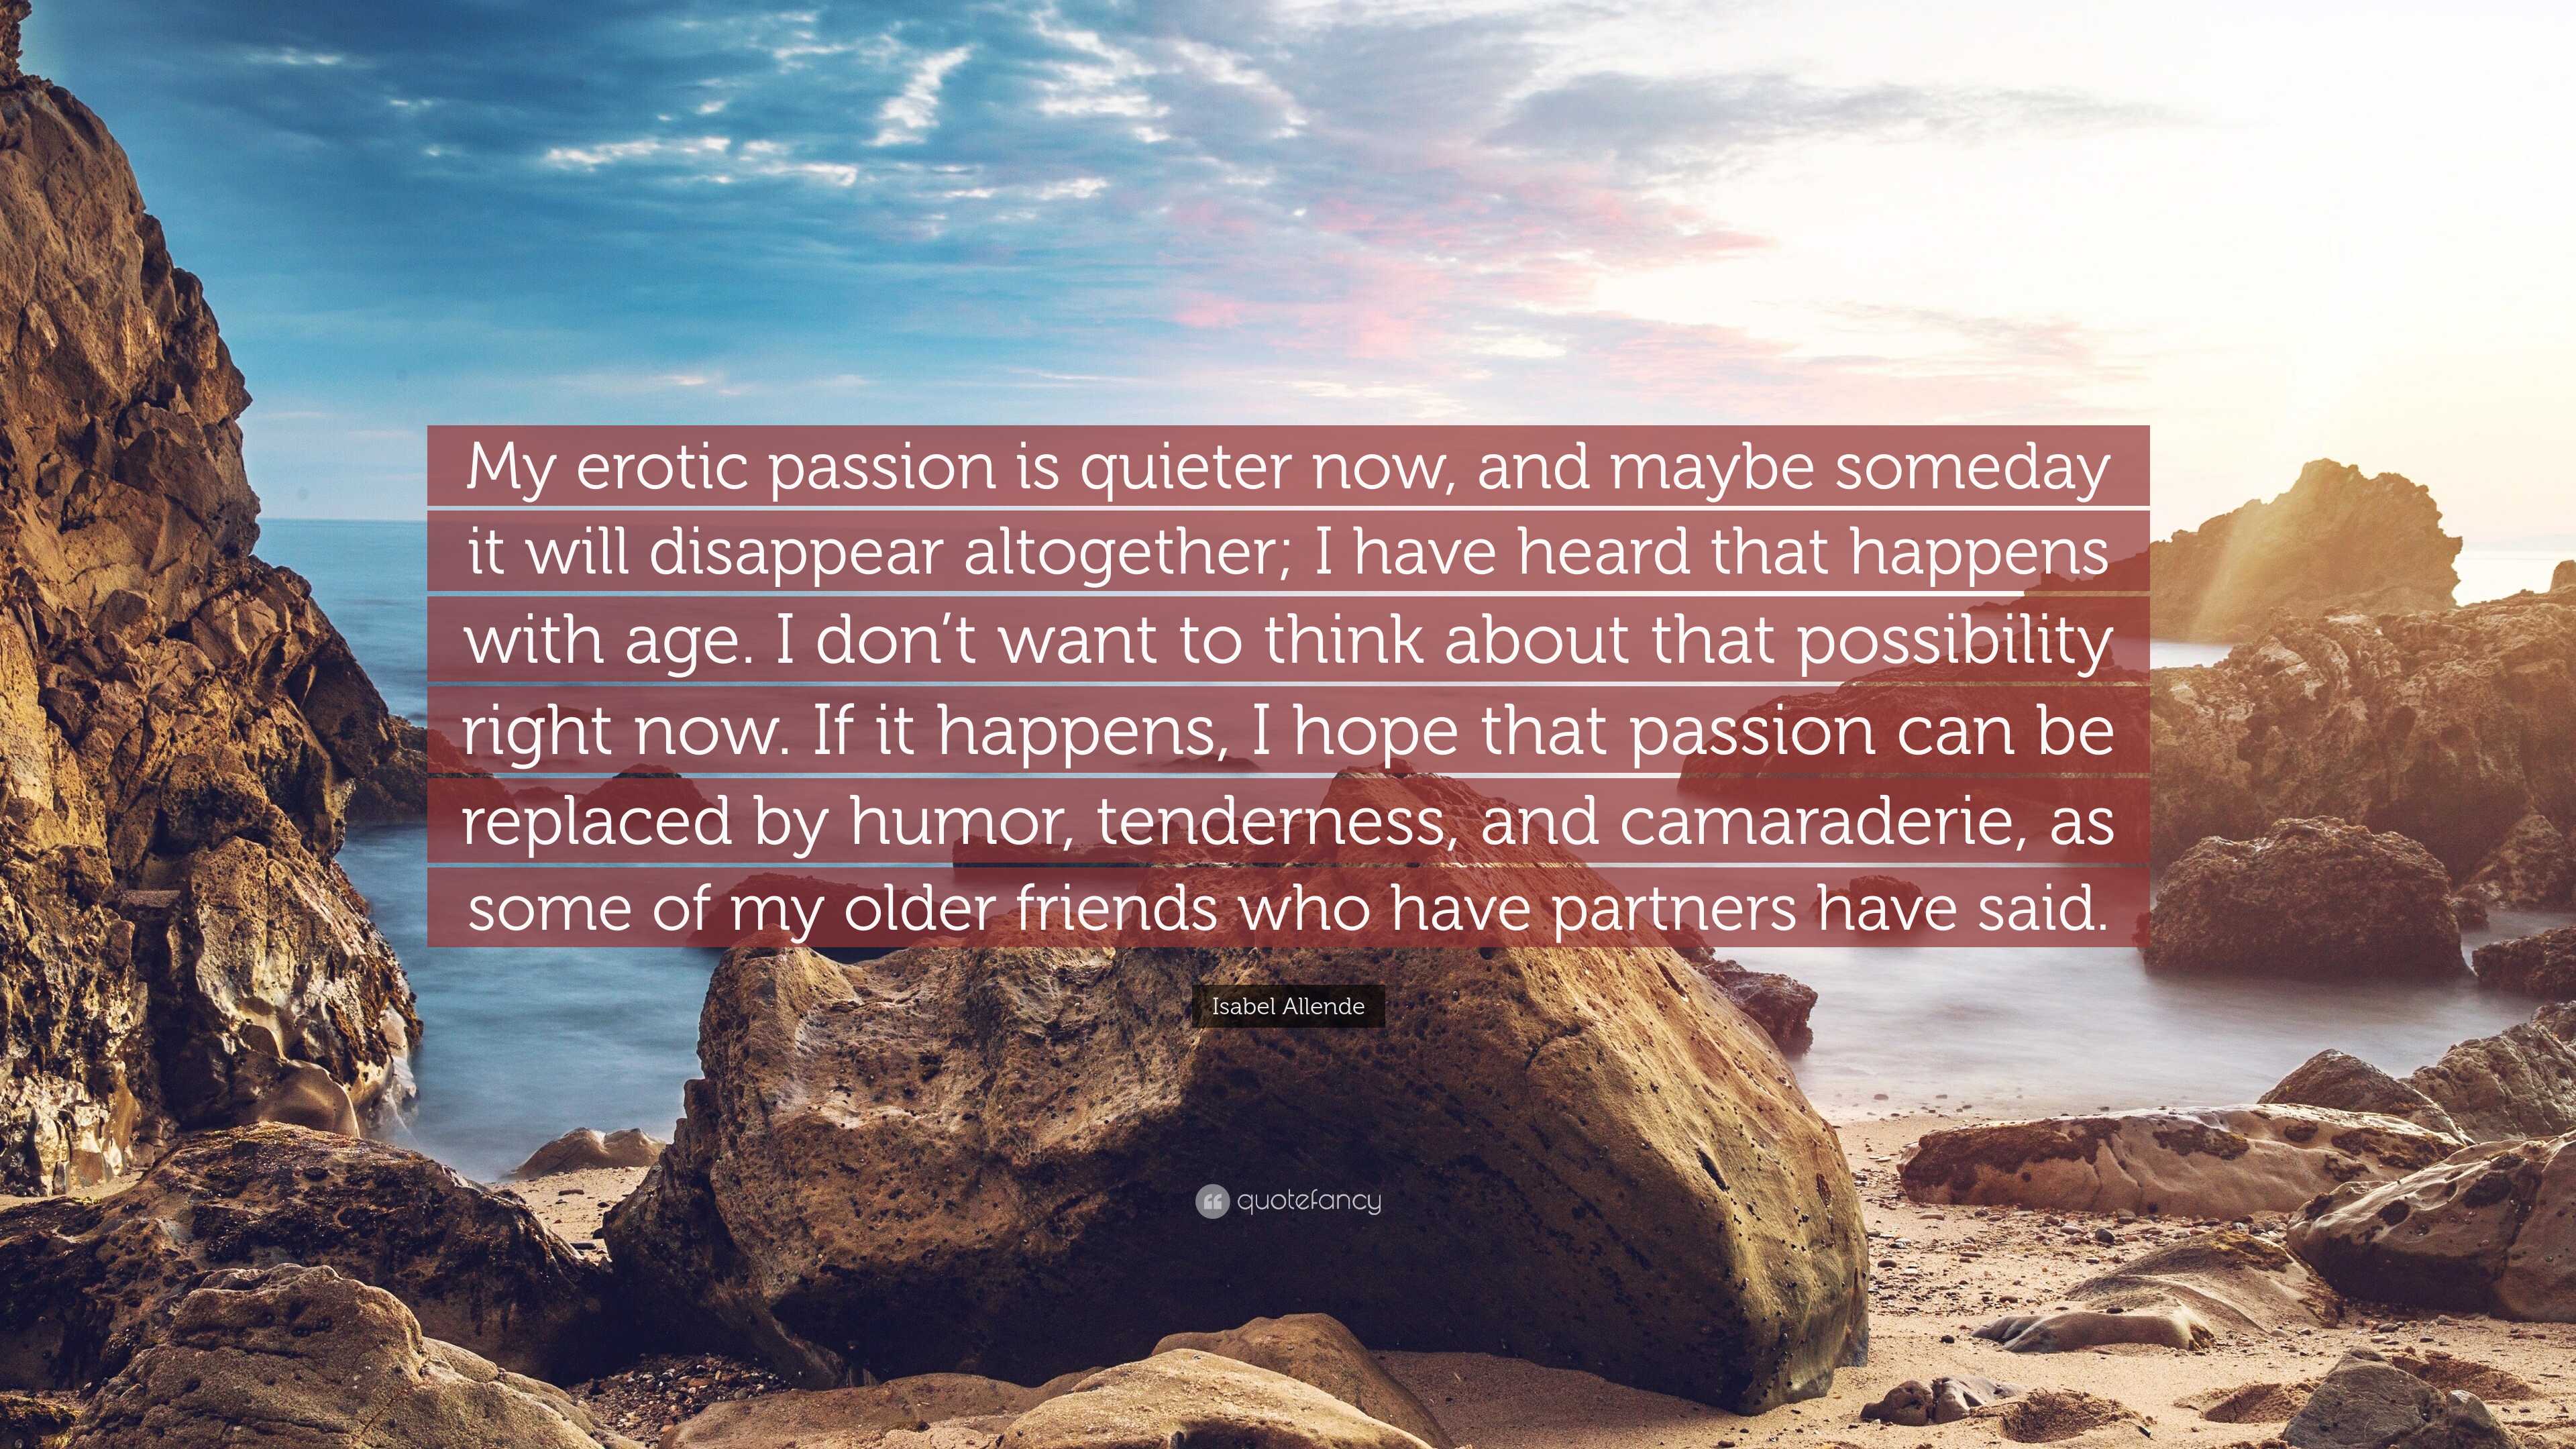 Isabel Allende Quote: “My erotic passion is quieter now, and maybe